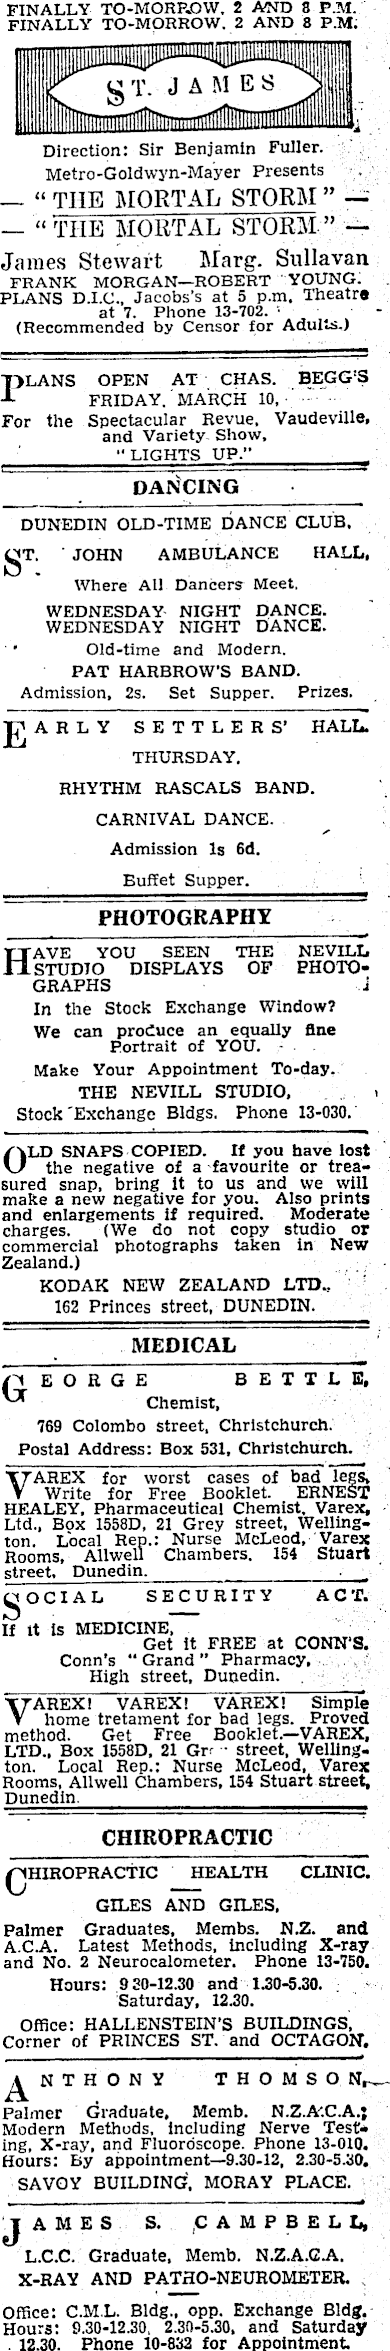 Papers Past Newspapers Otago Daily Times 8 March 1944 Page 8 Advertisements Column 8